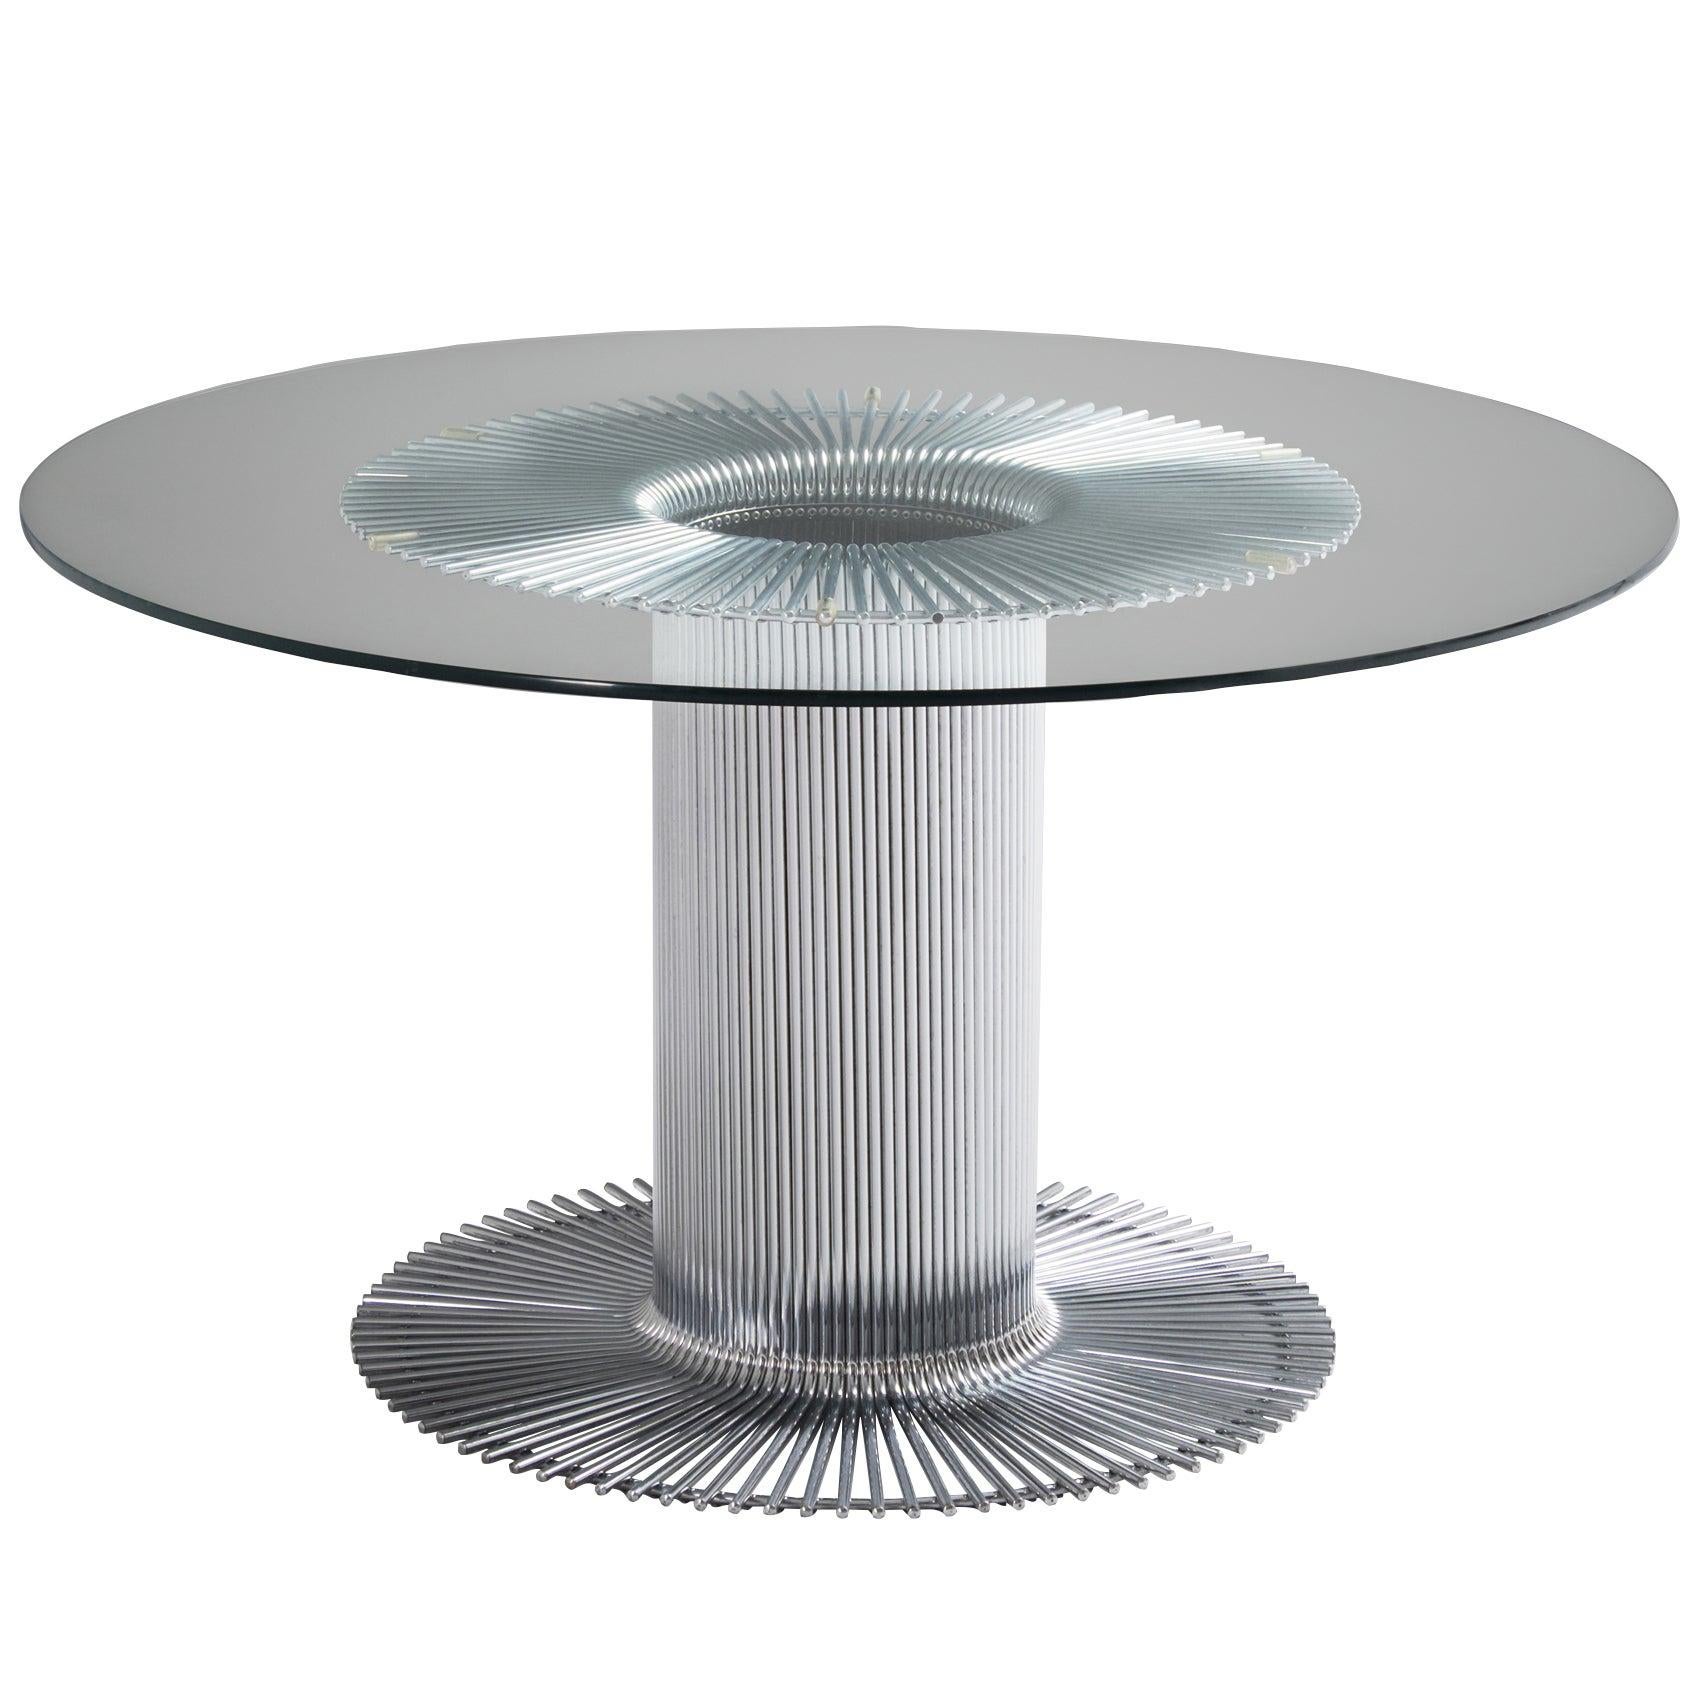 Italian Pedestal Dining Table in Chrome and Glass